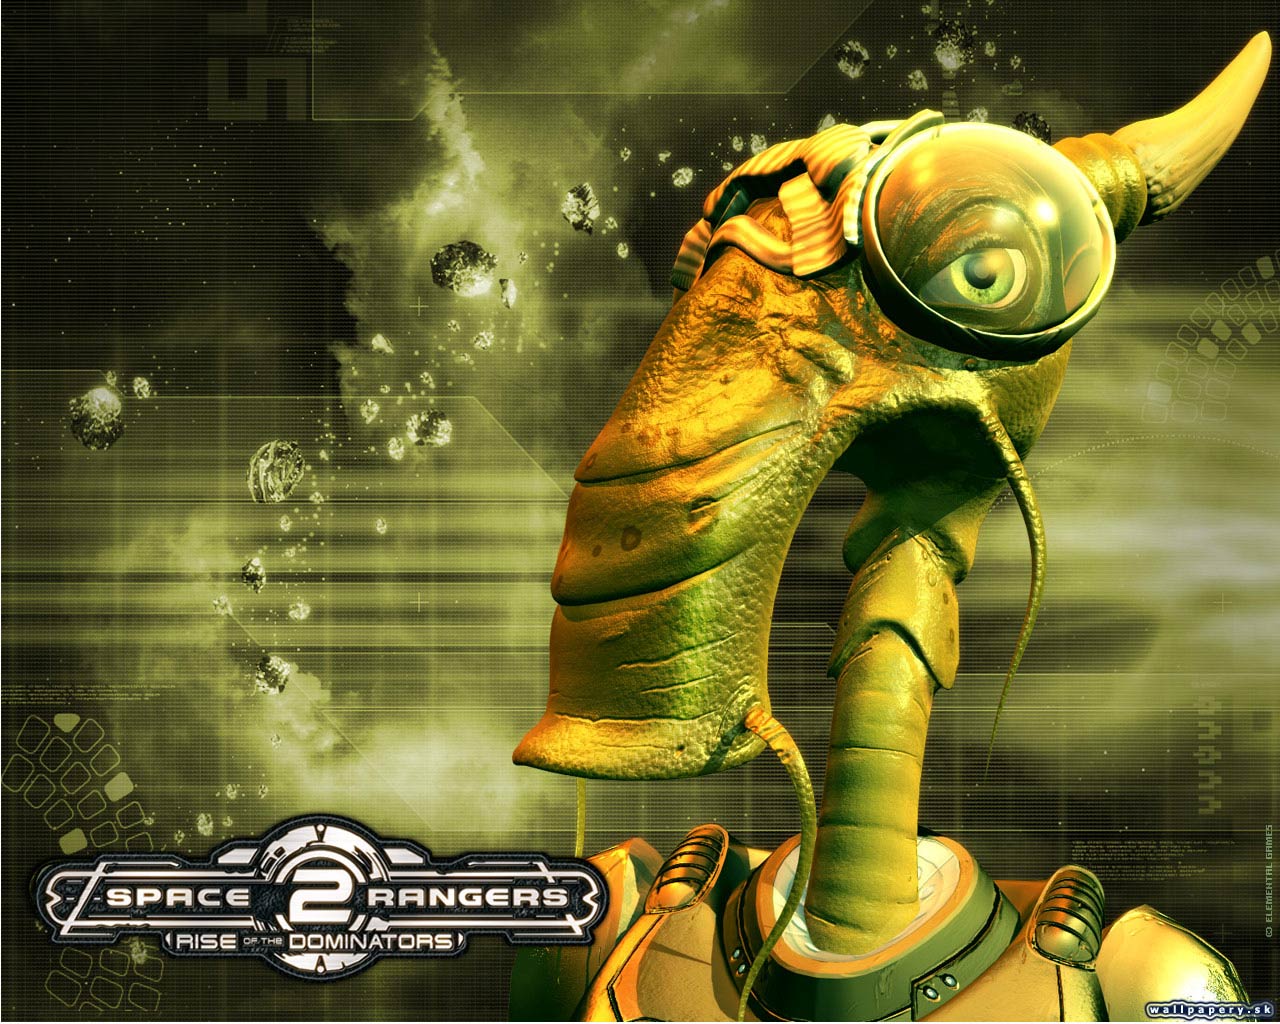 Space Rangers 2: Rise Of The Dominators - wallpaper 1